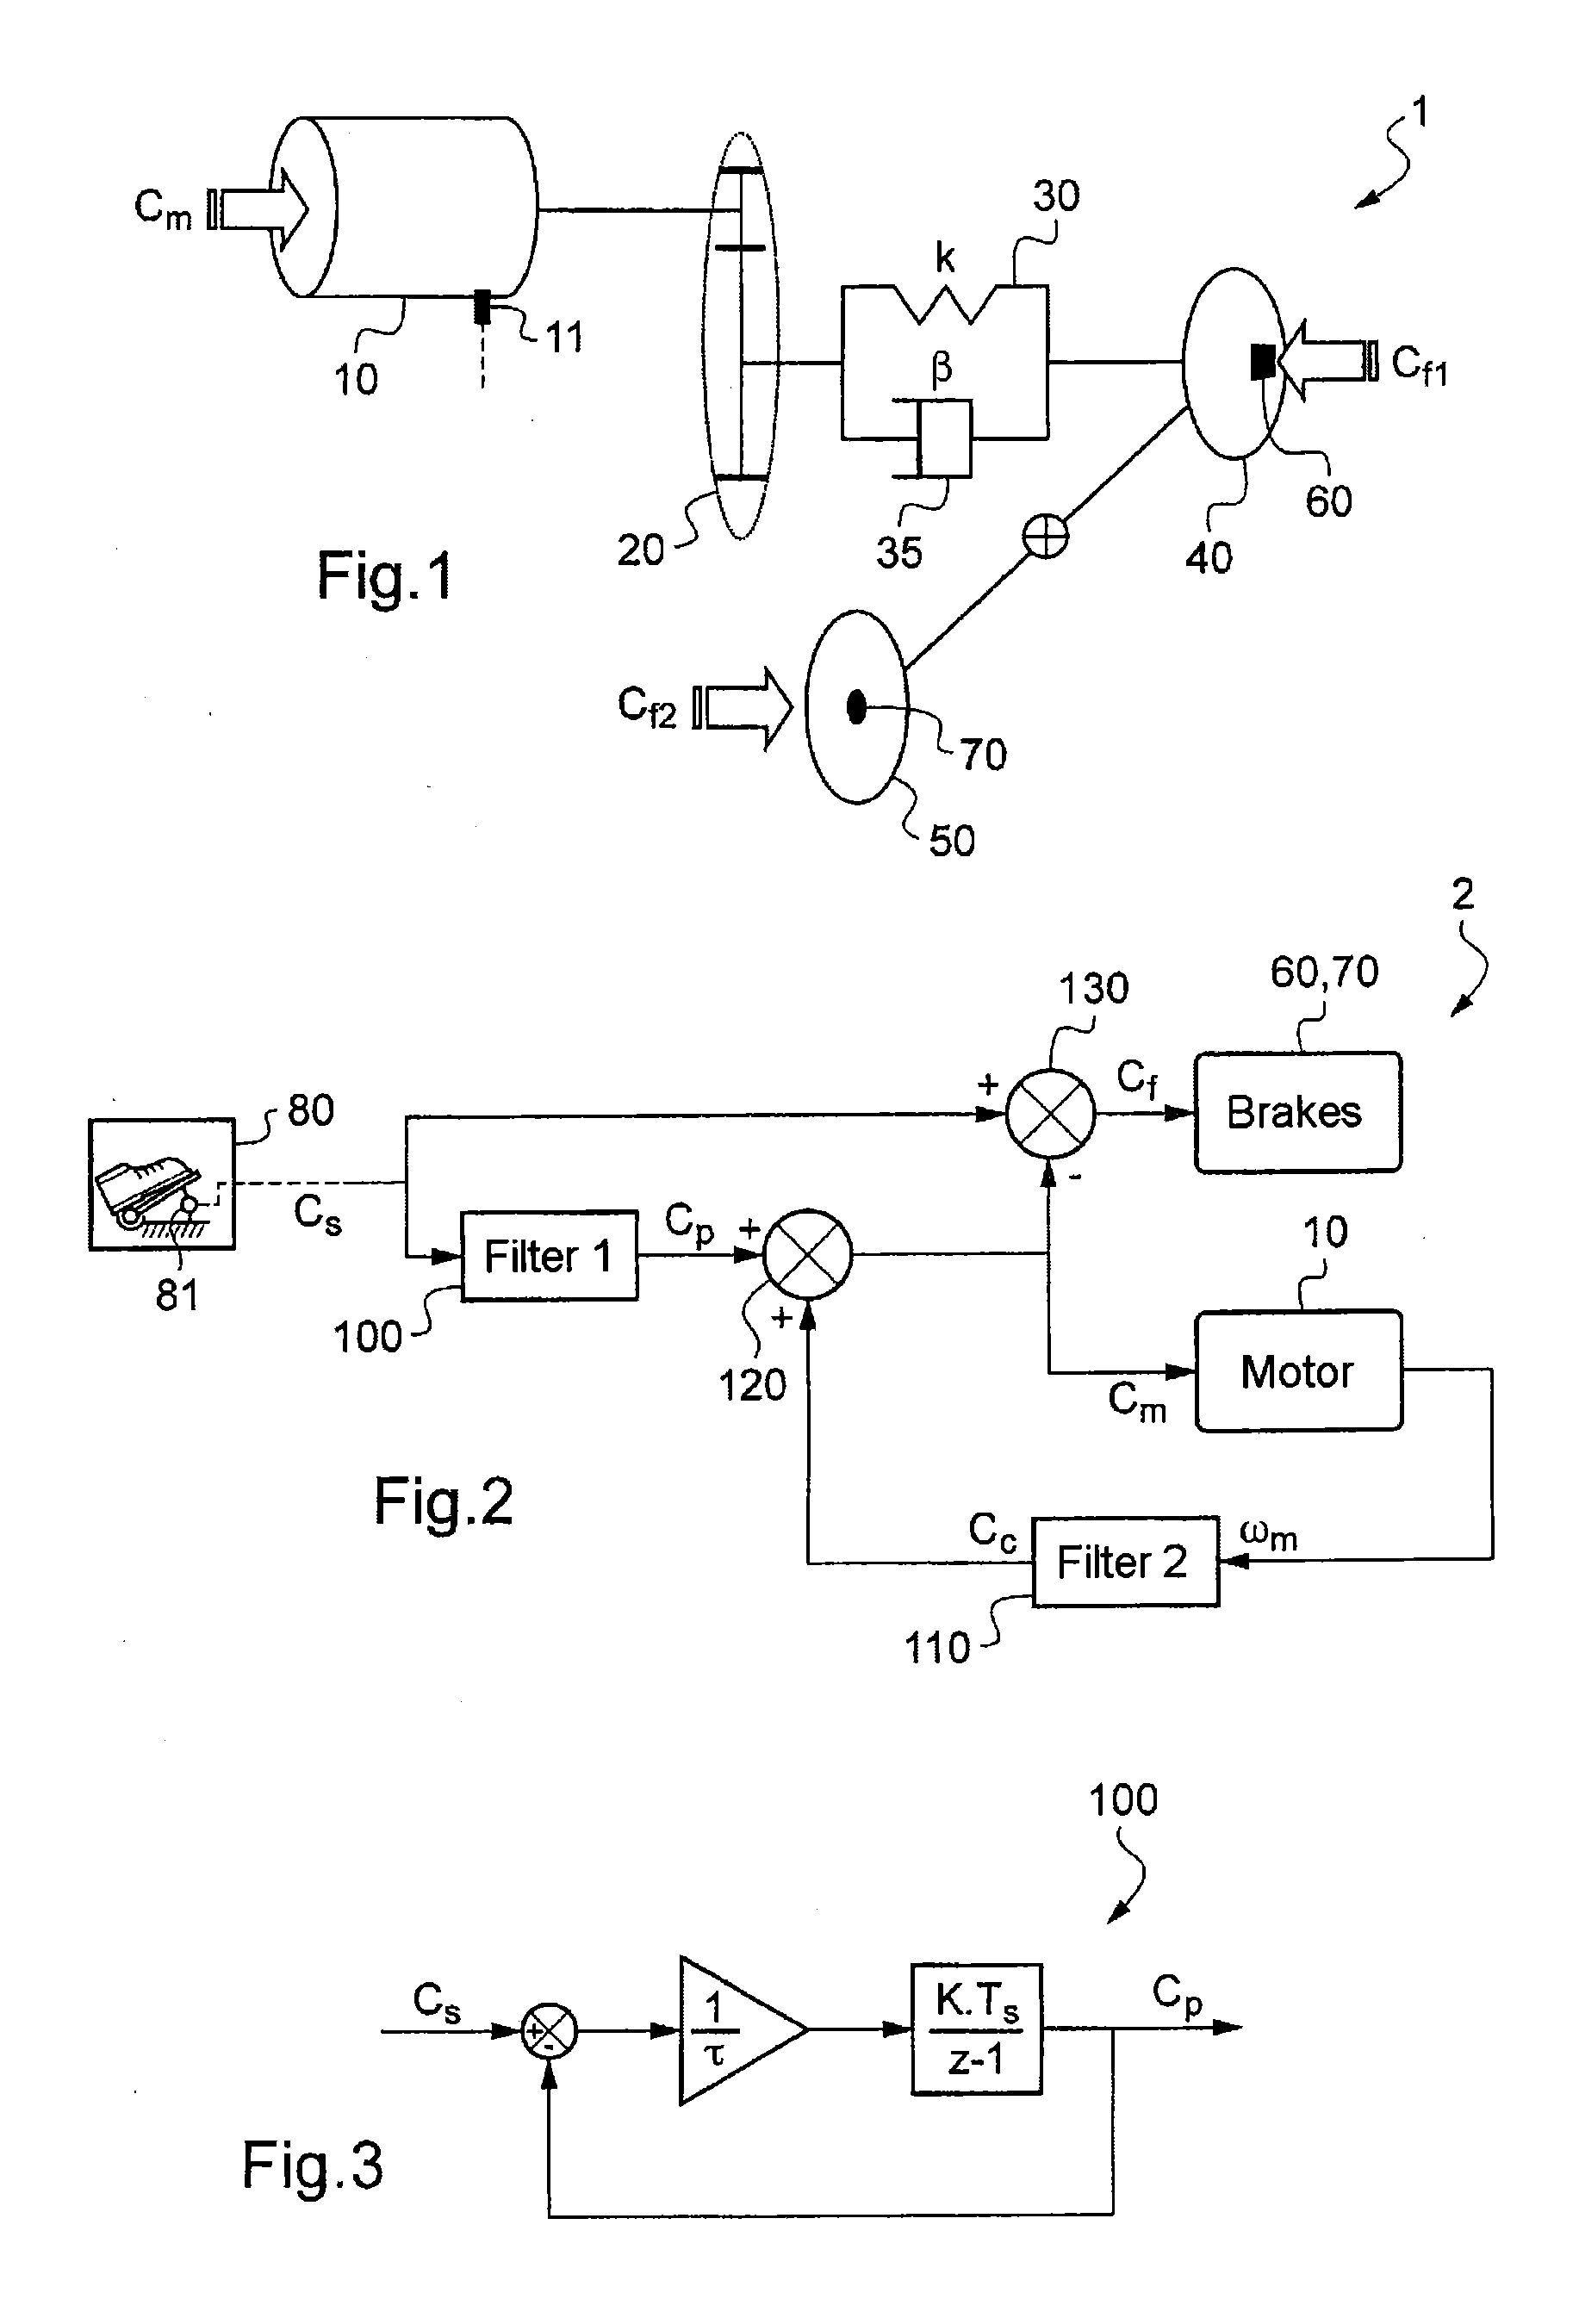 Method for controlling a means for recovering energy generated by the braking of a motor vehicle